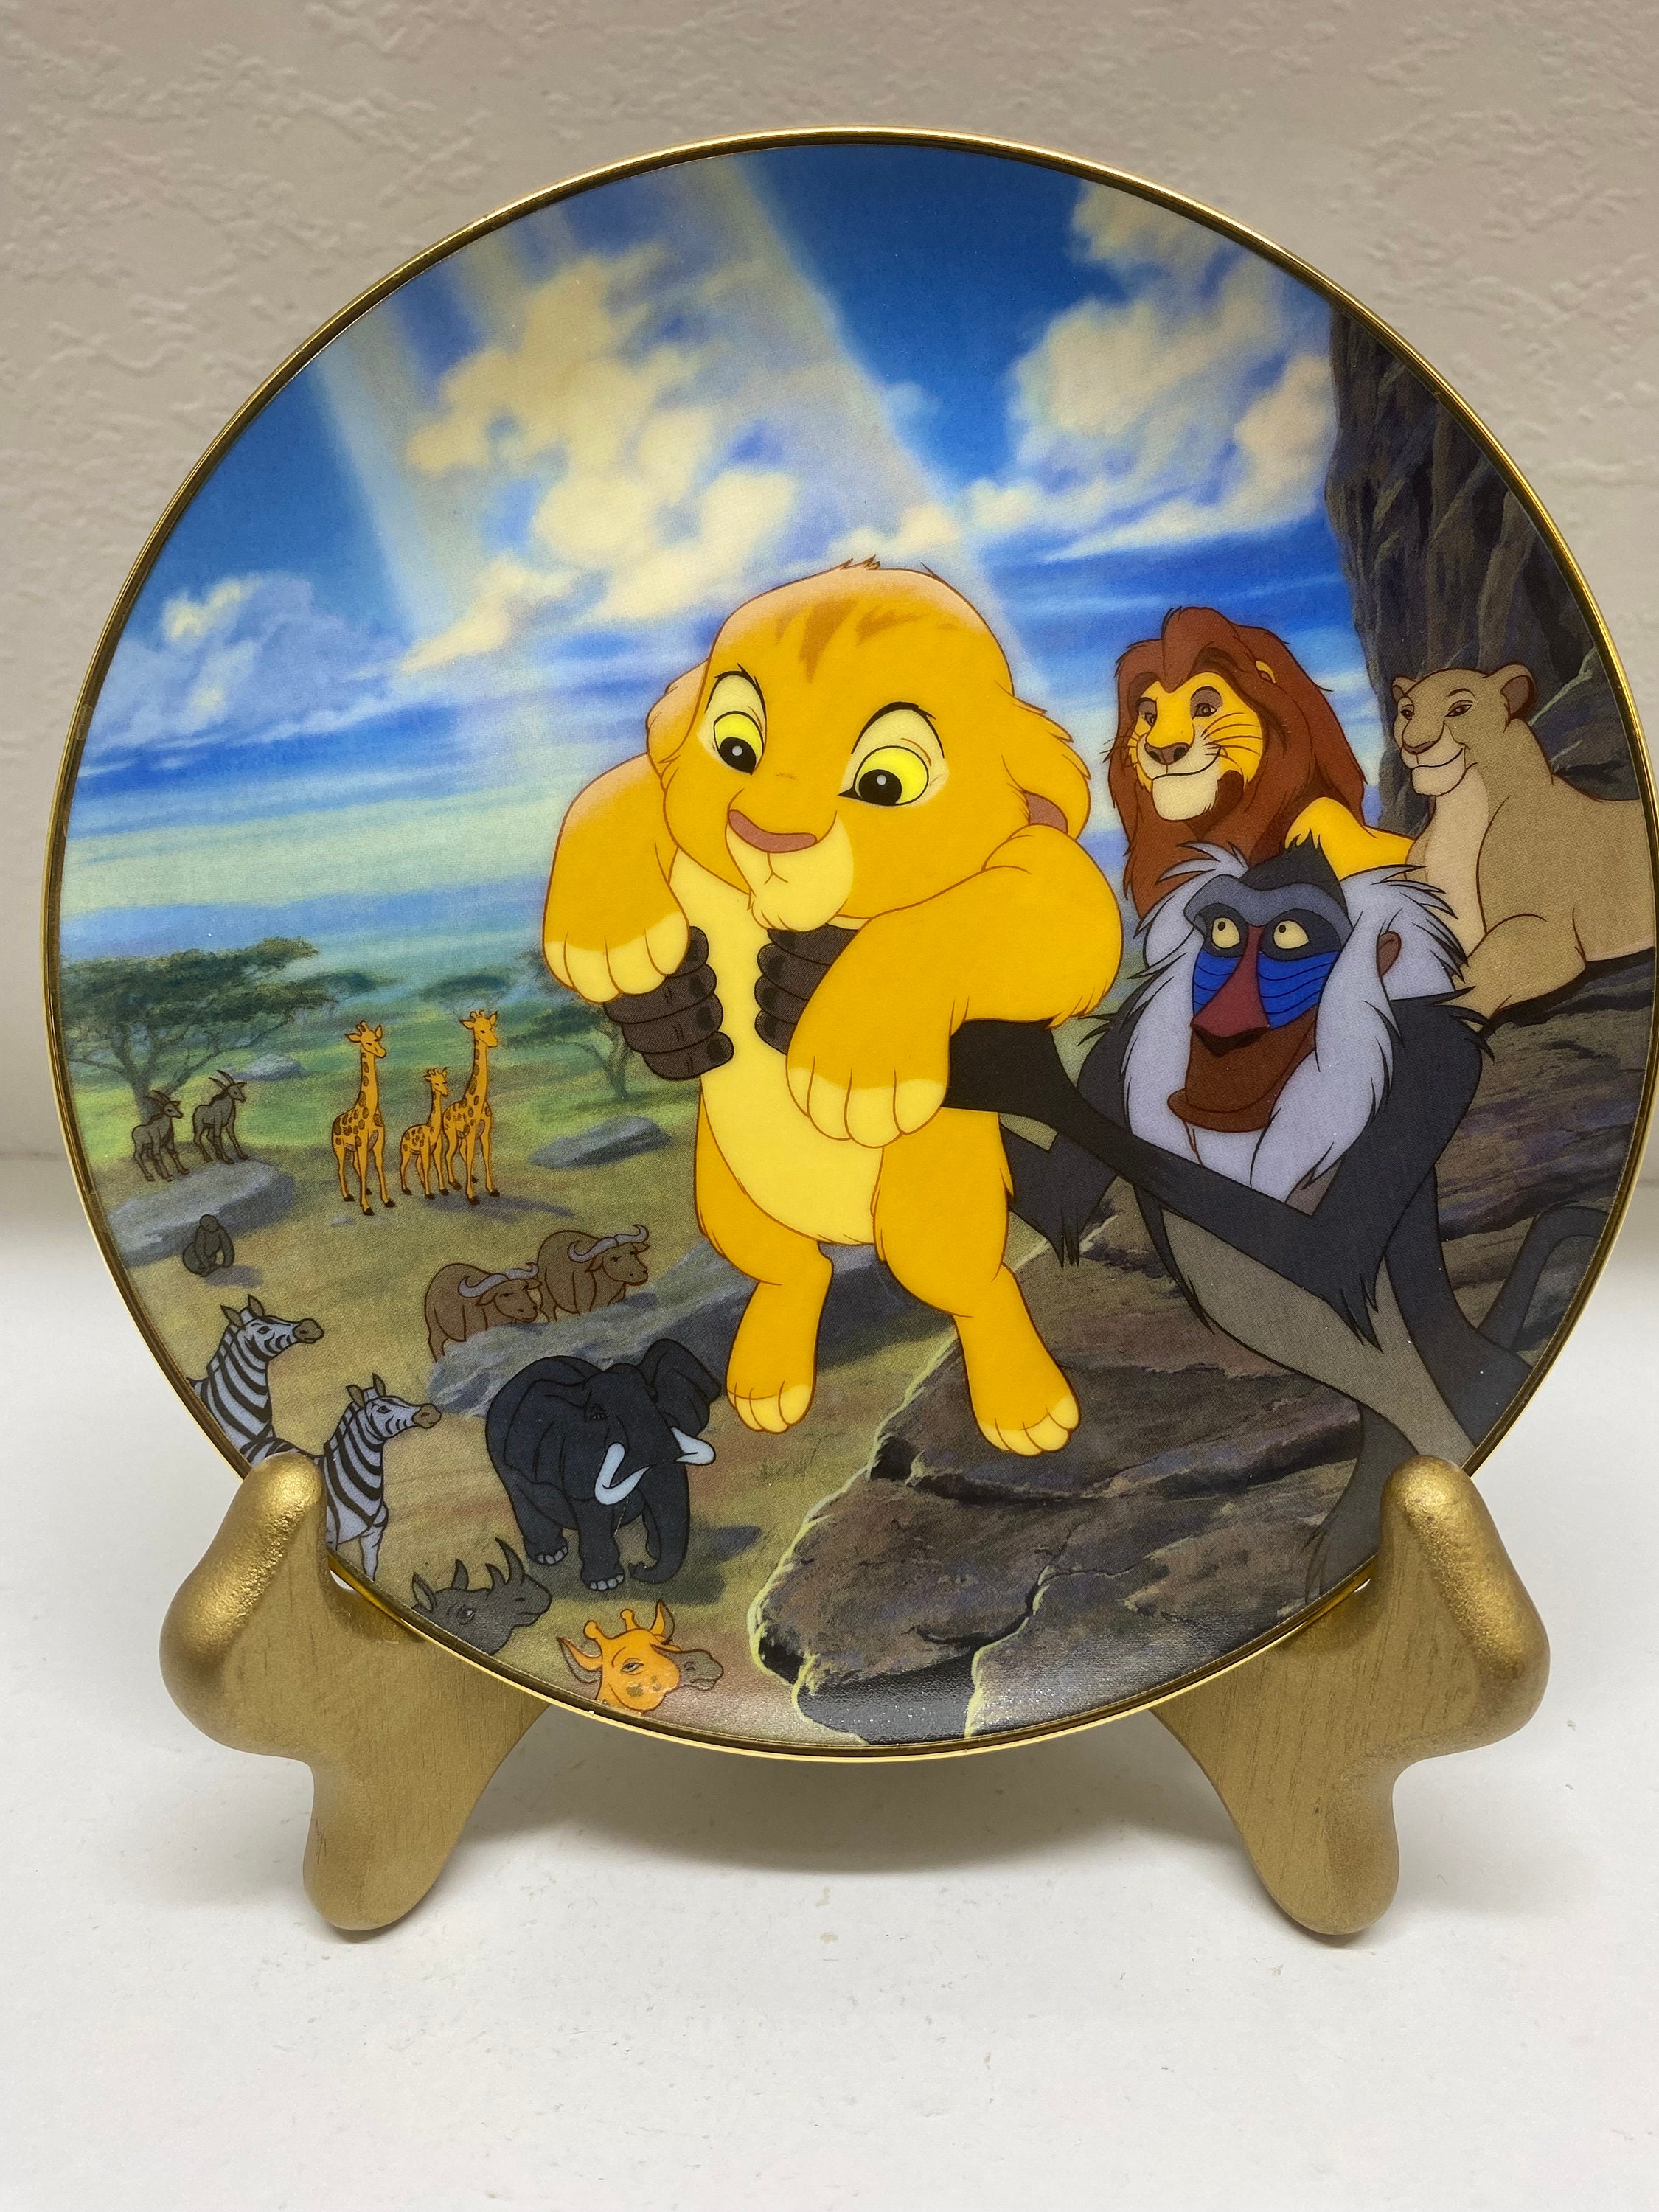 DISNEY GROLIER CHRISTMAS PLATE 1998 LION KING JUNGLE BELLS WITH